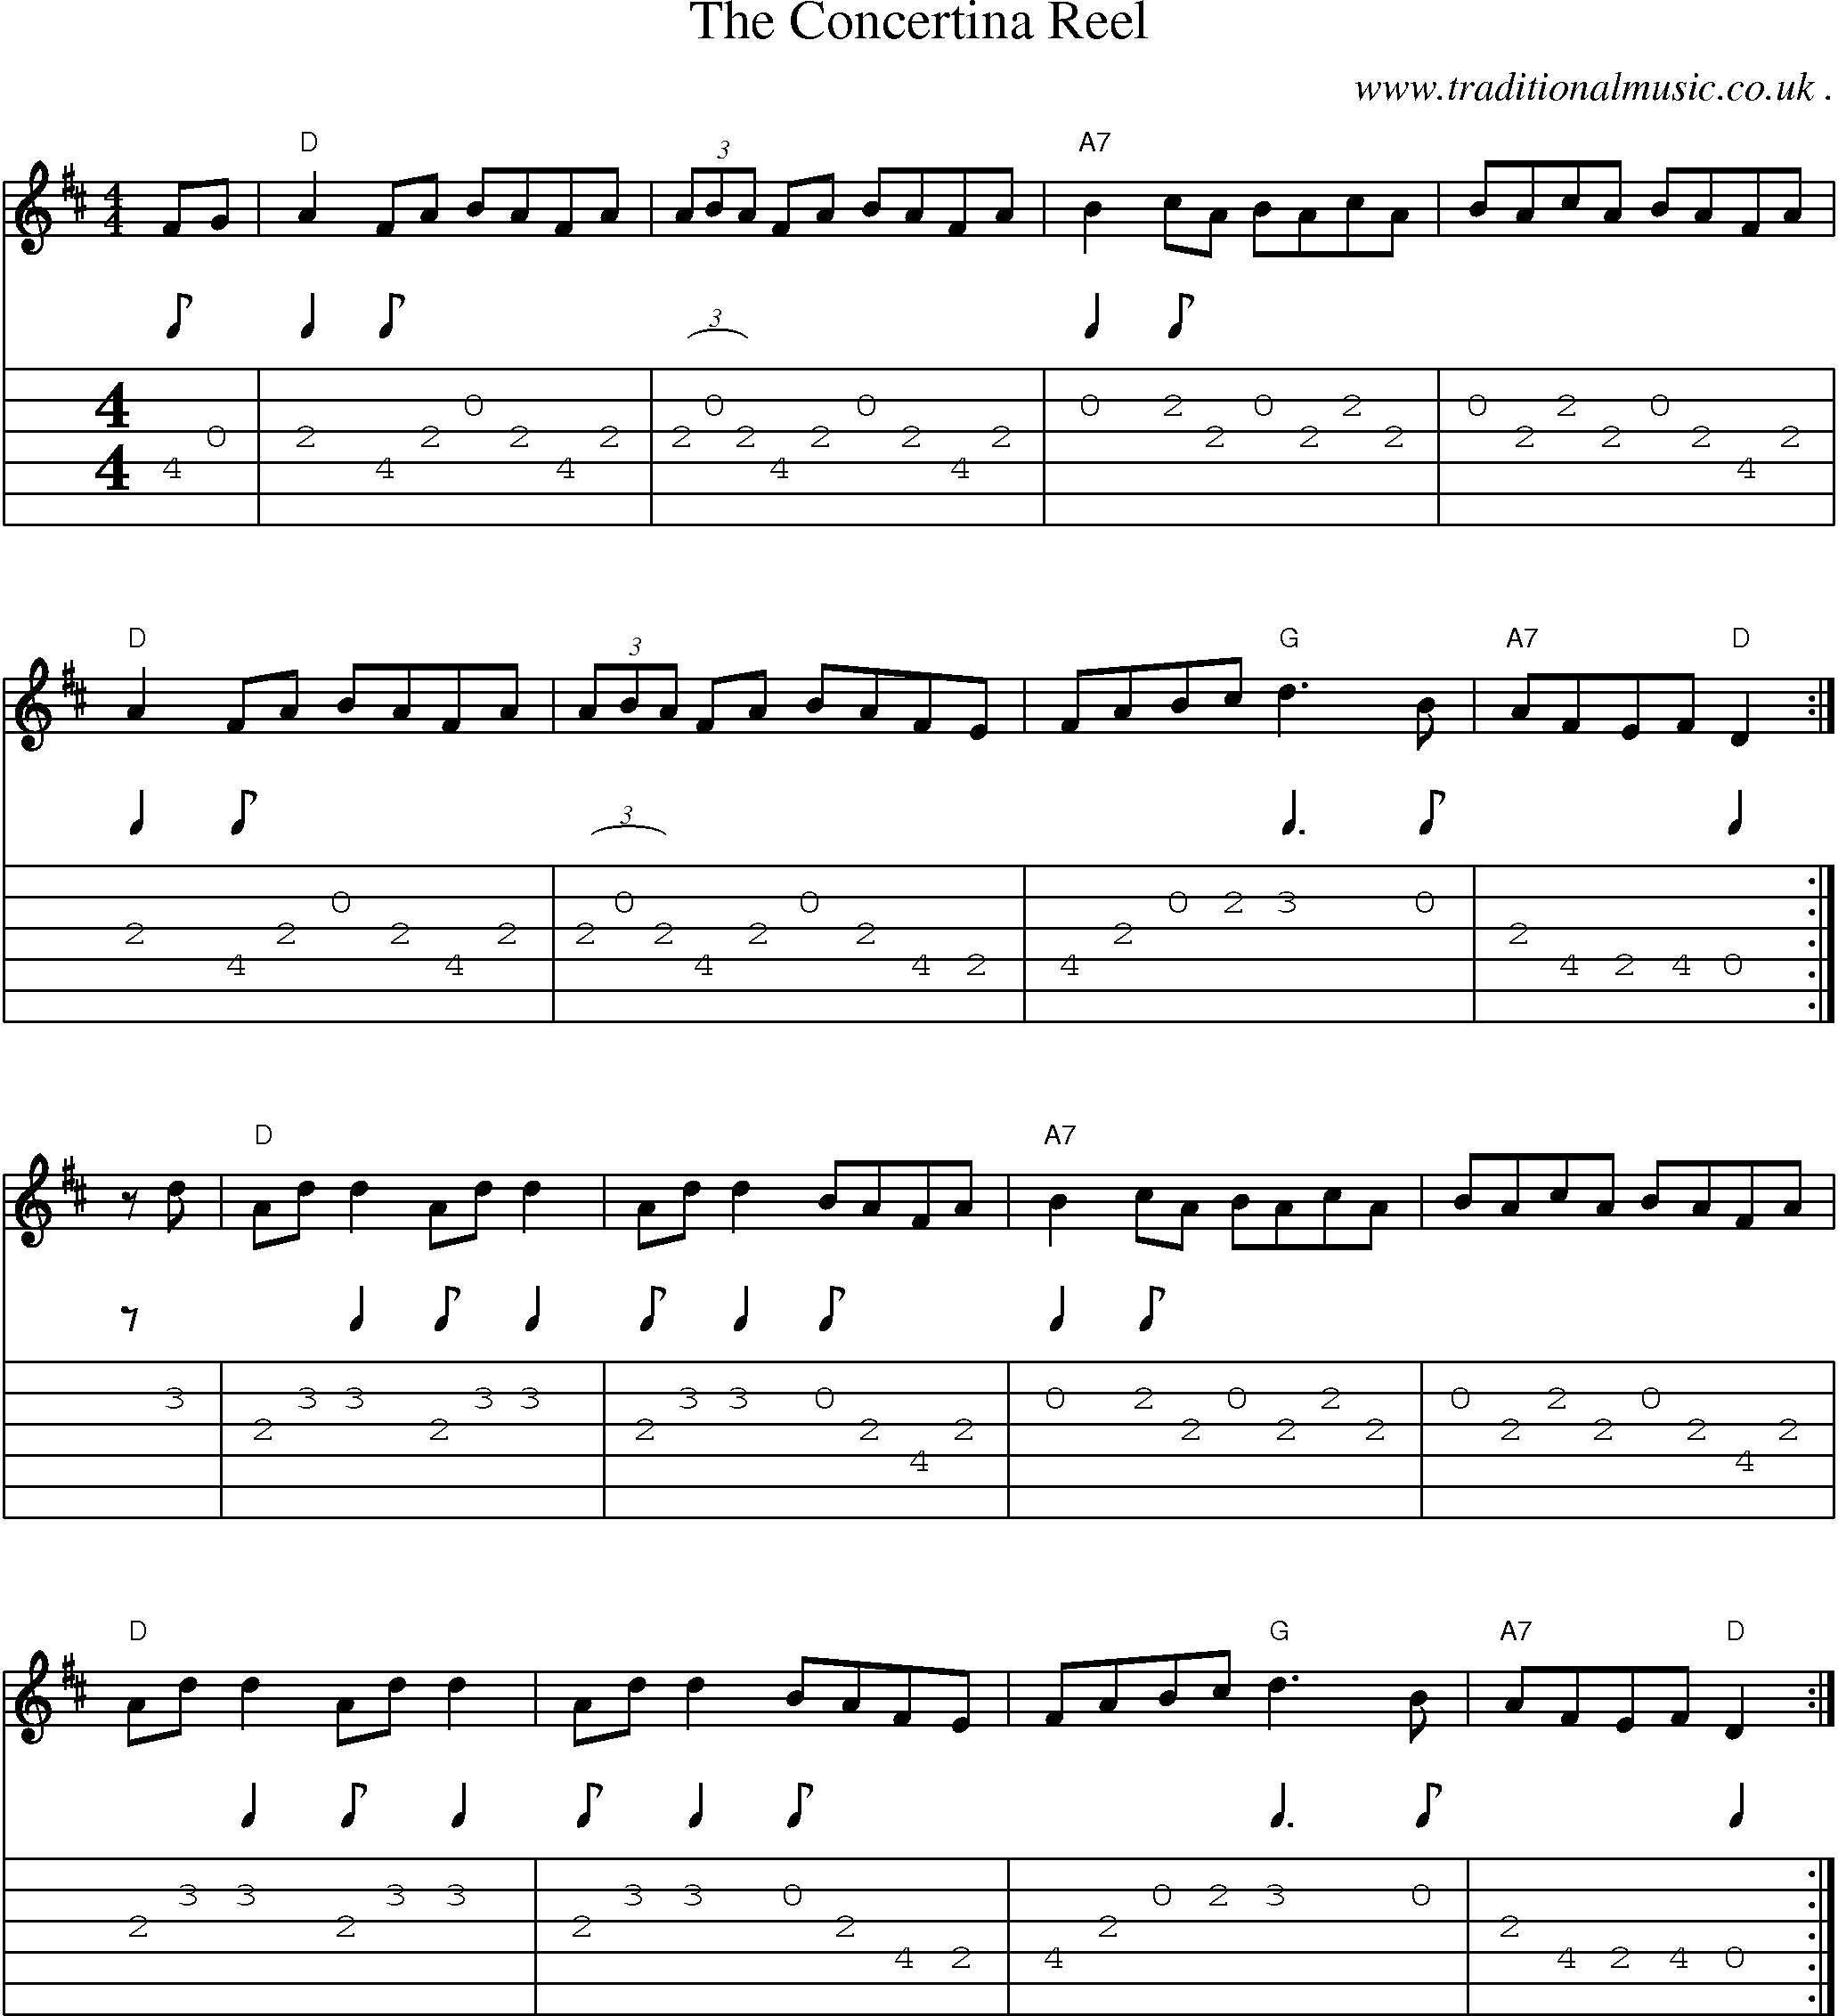 Sheet-music  score, Chords and Guitar Tabs for The Concertina Reel